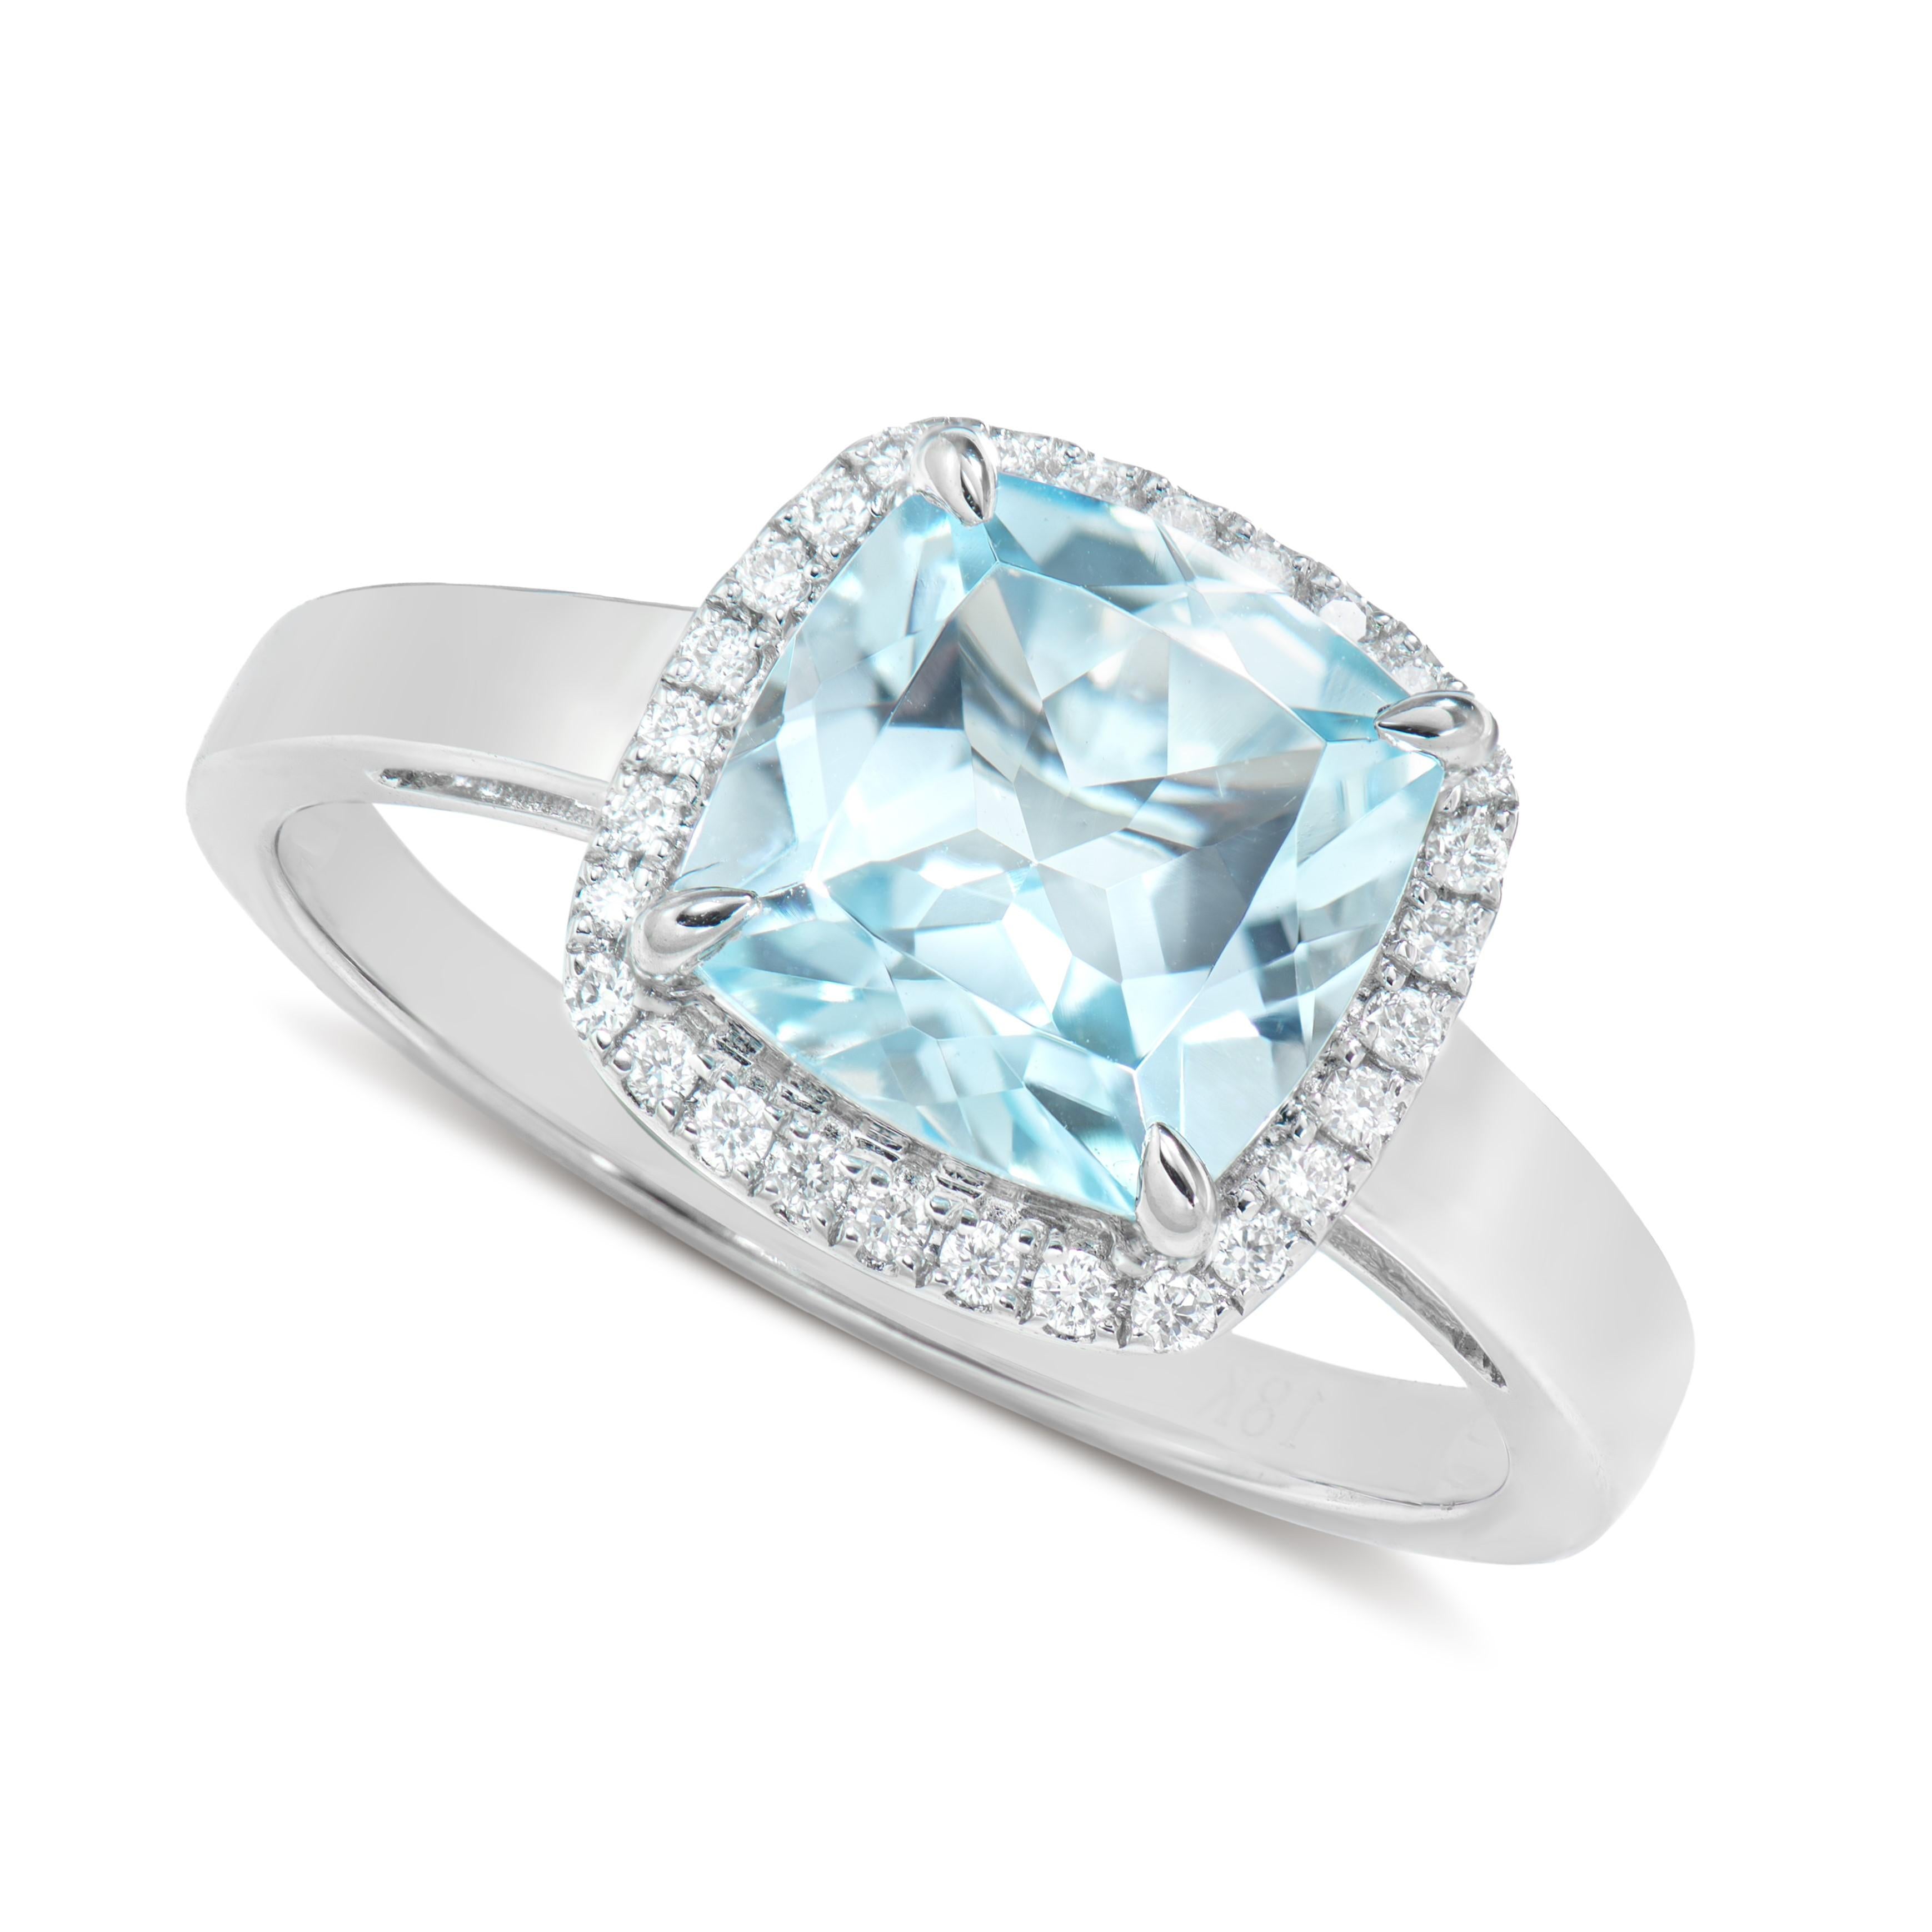 Contemporary 2.68 Carat Swiss Blue Topaz Fancy Ring in 18Karat White Gold with White Diamond. For Sale